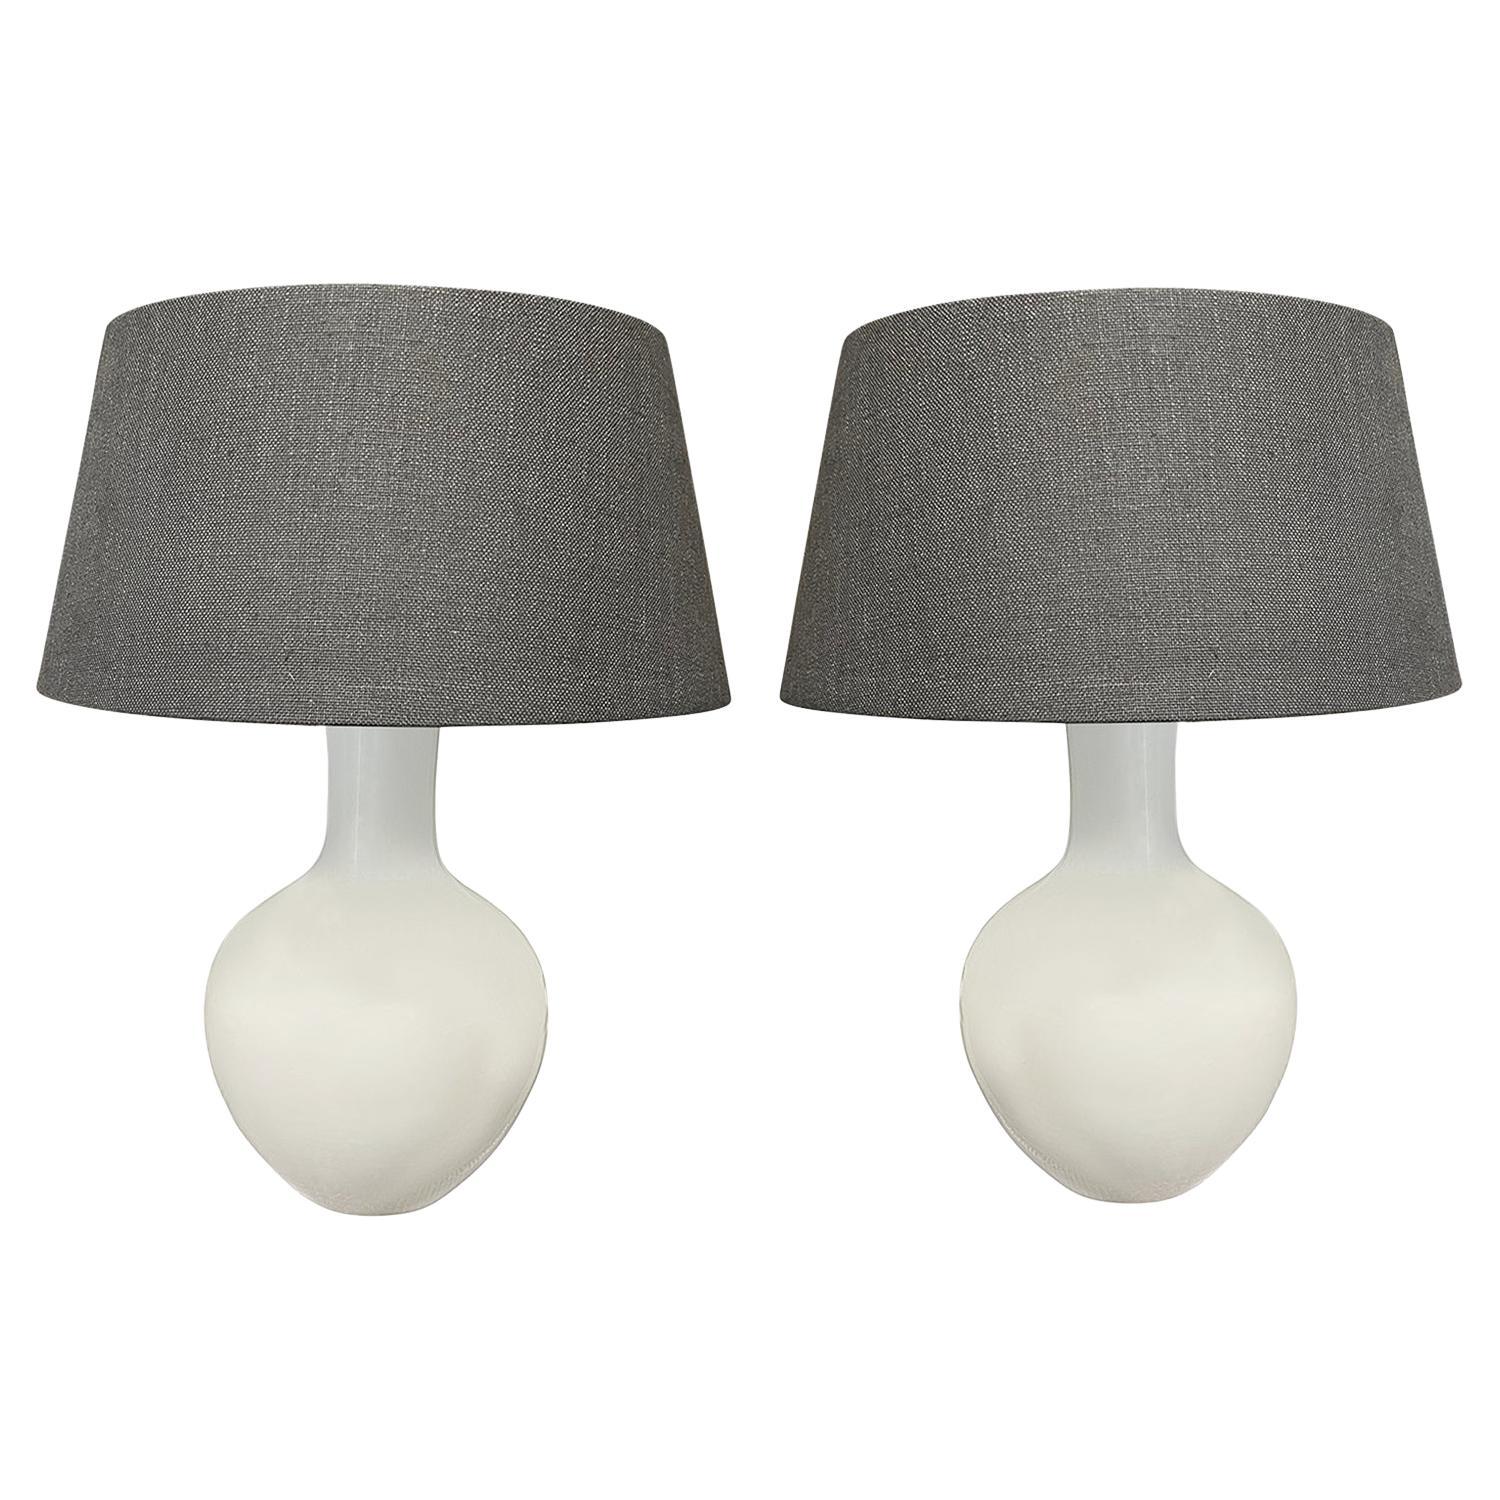 White Funnel Neck Shaped Pair Of Lamps With Shades, China, Contemporary